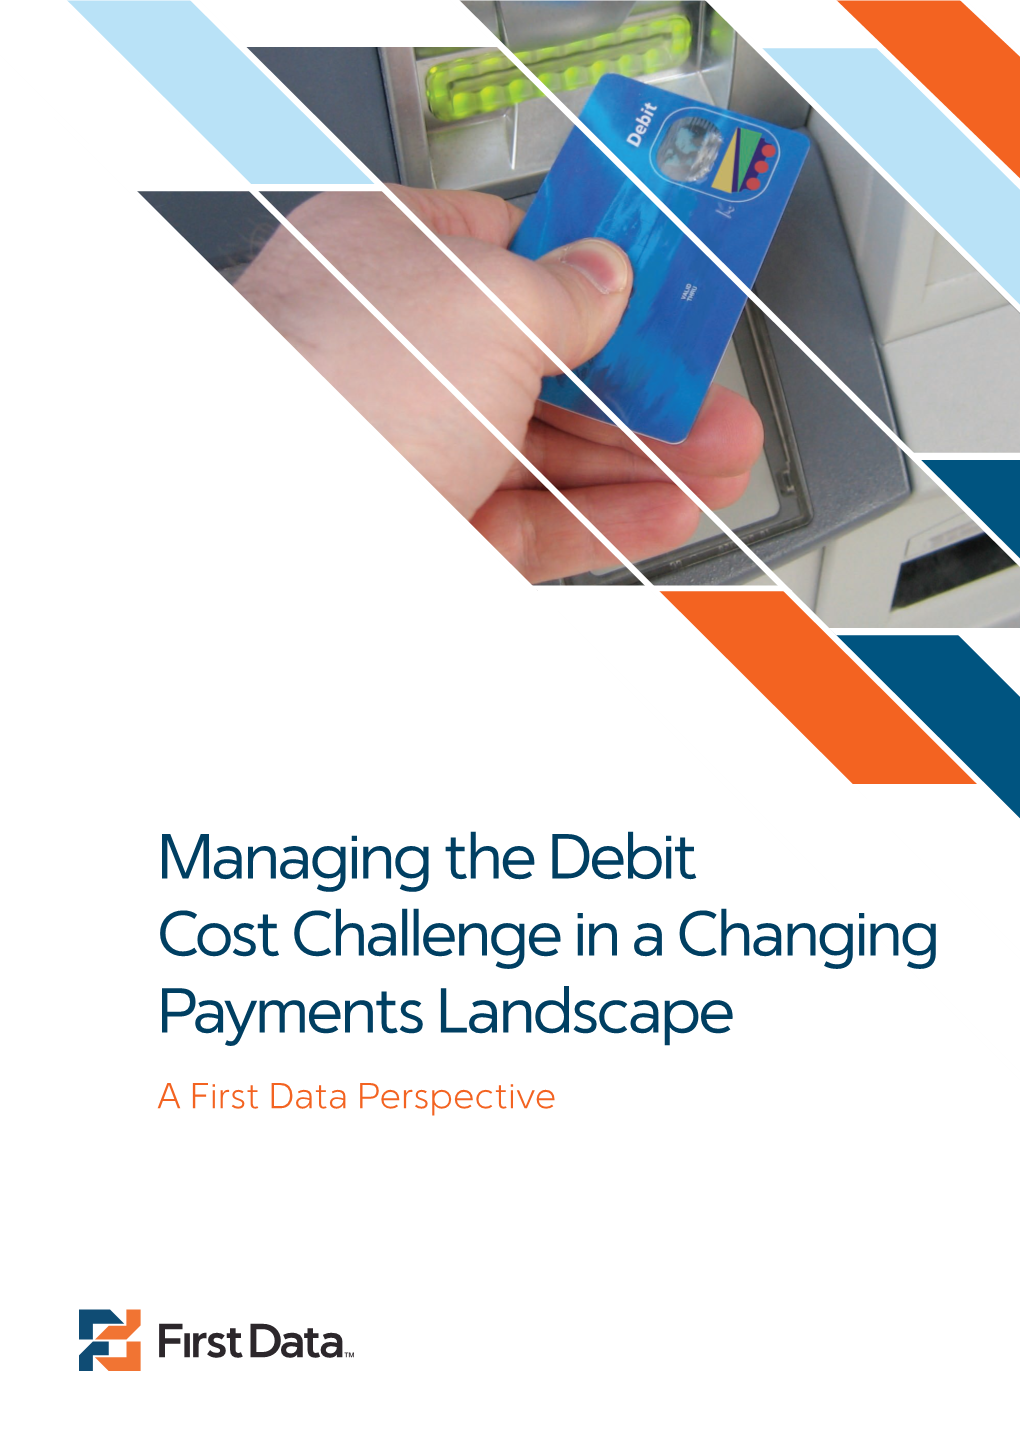 Managing the Debit Cost Challenge in a Changing Payments Landscape